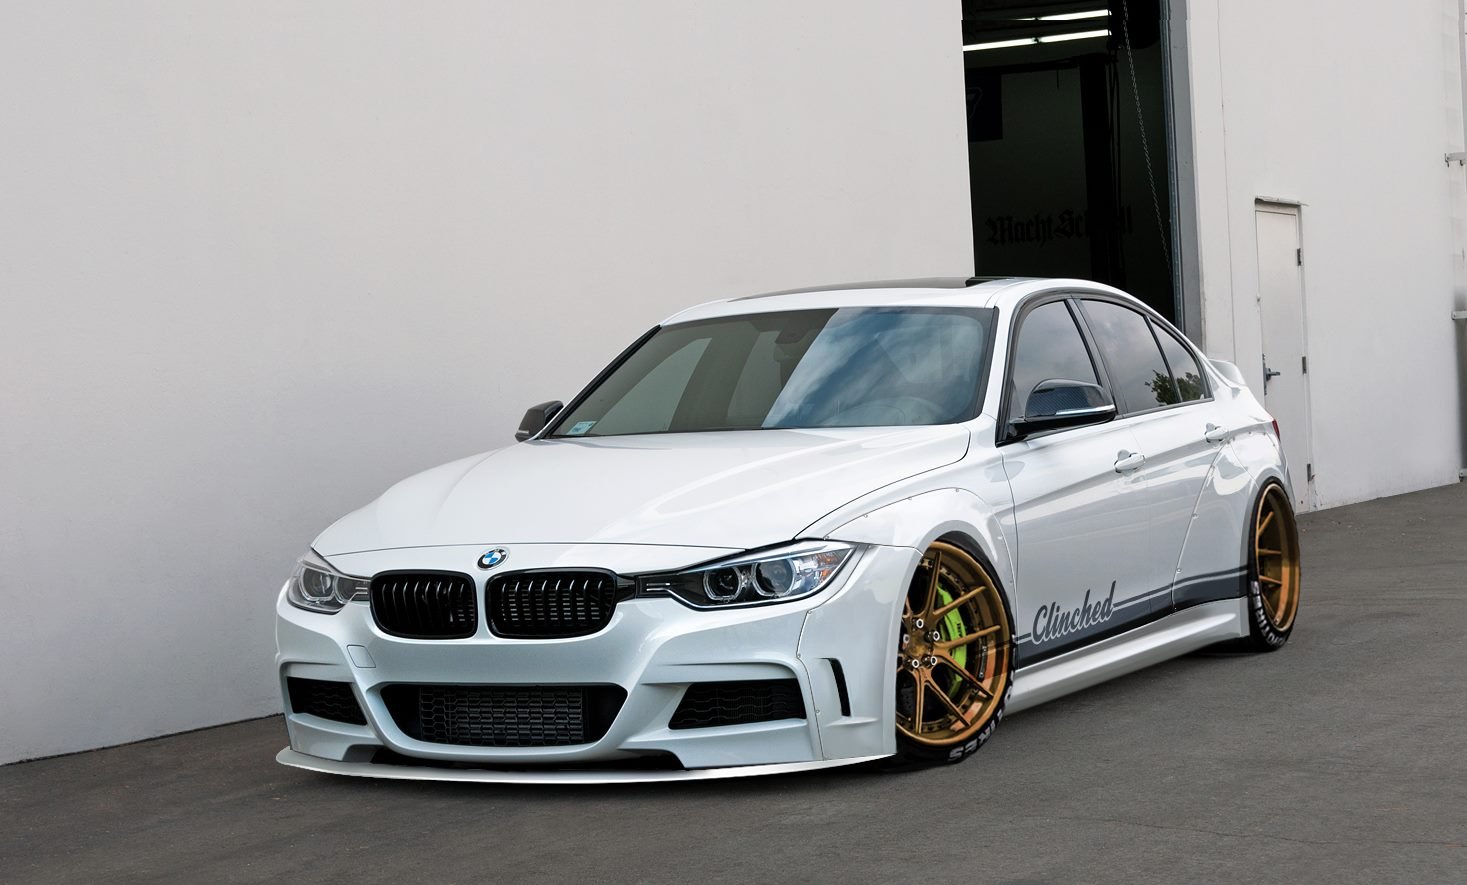 White Stanced BMW 3-Series with Aftermarket Front Bumper - Photo by Clinched